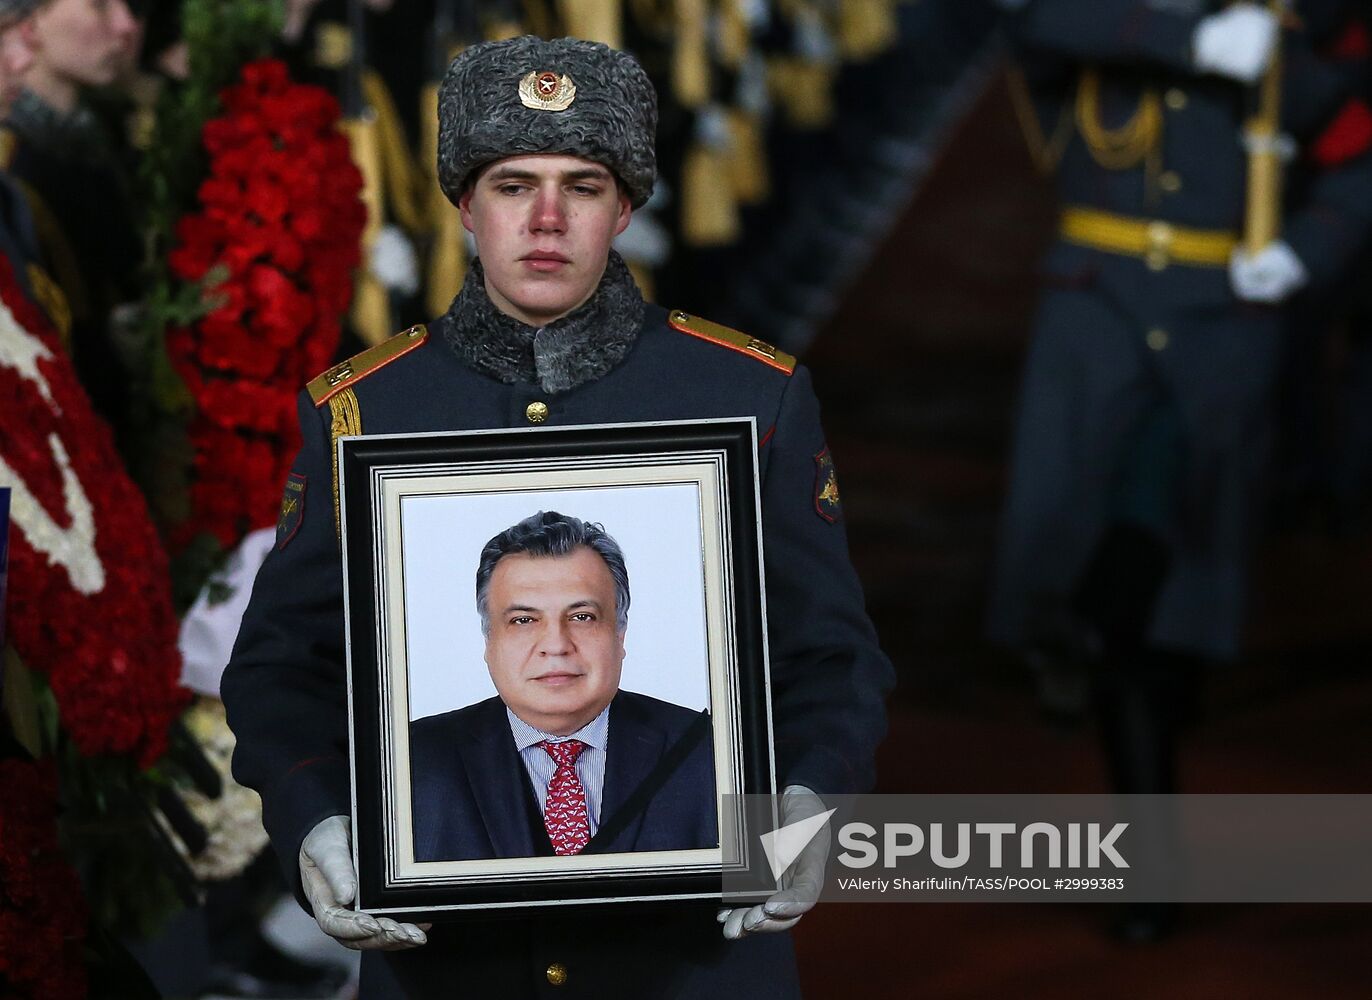 Meeting aircraft with body of Russian Ambassador to Turkey Andrei Karlov